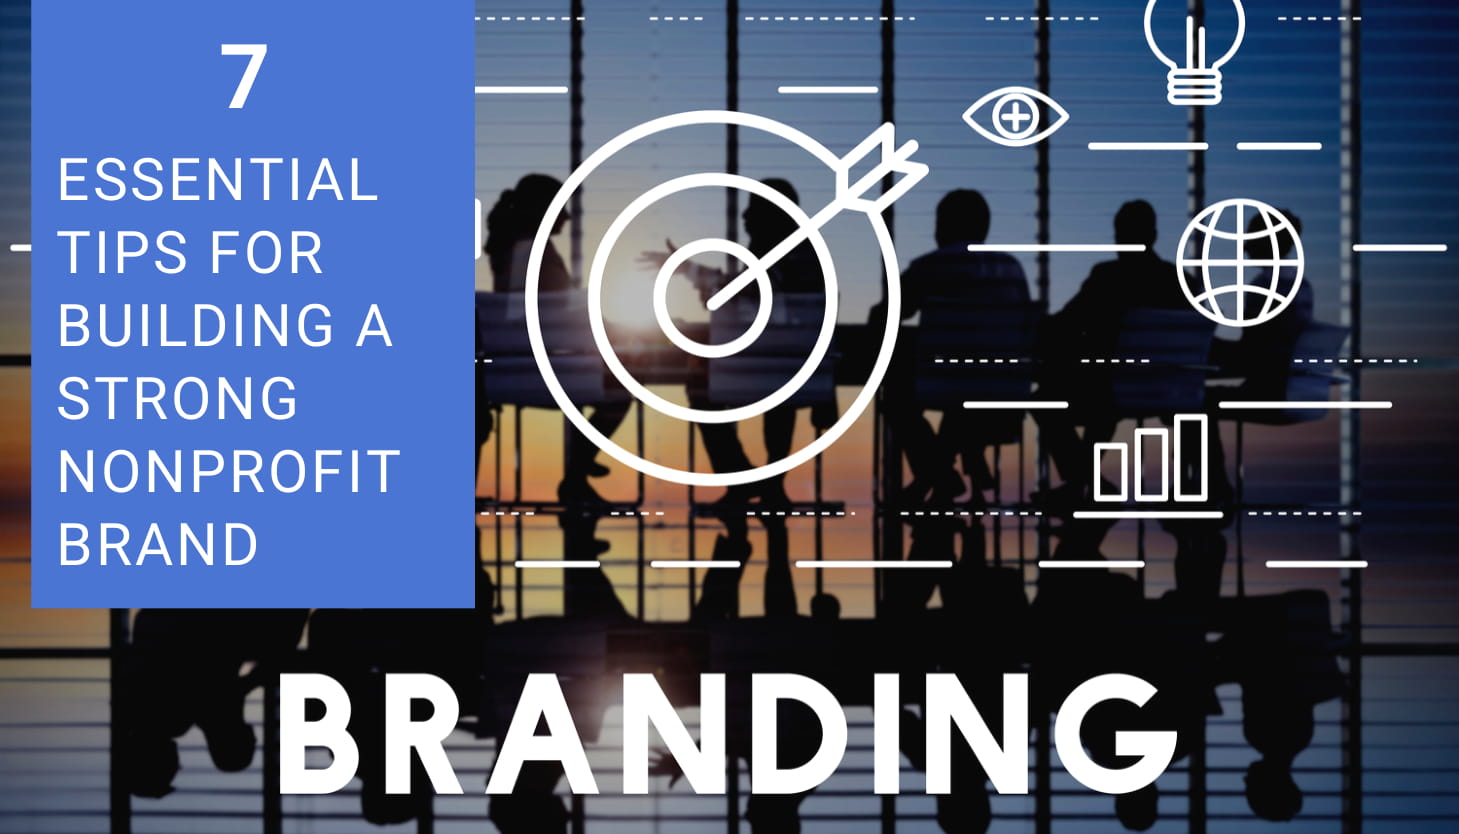 7 Essential Tips for Building a Strong Nonprofit Brand